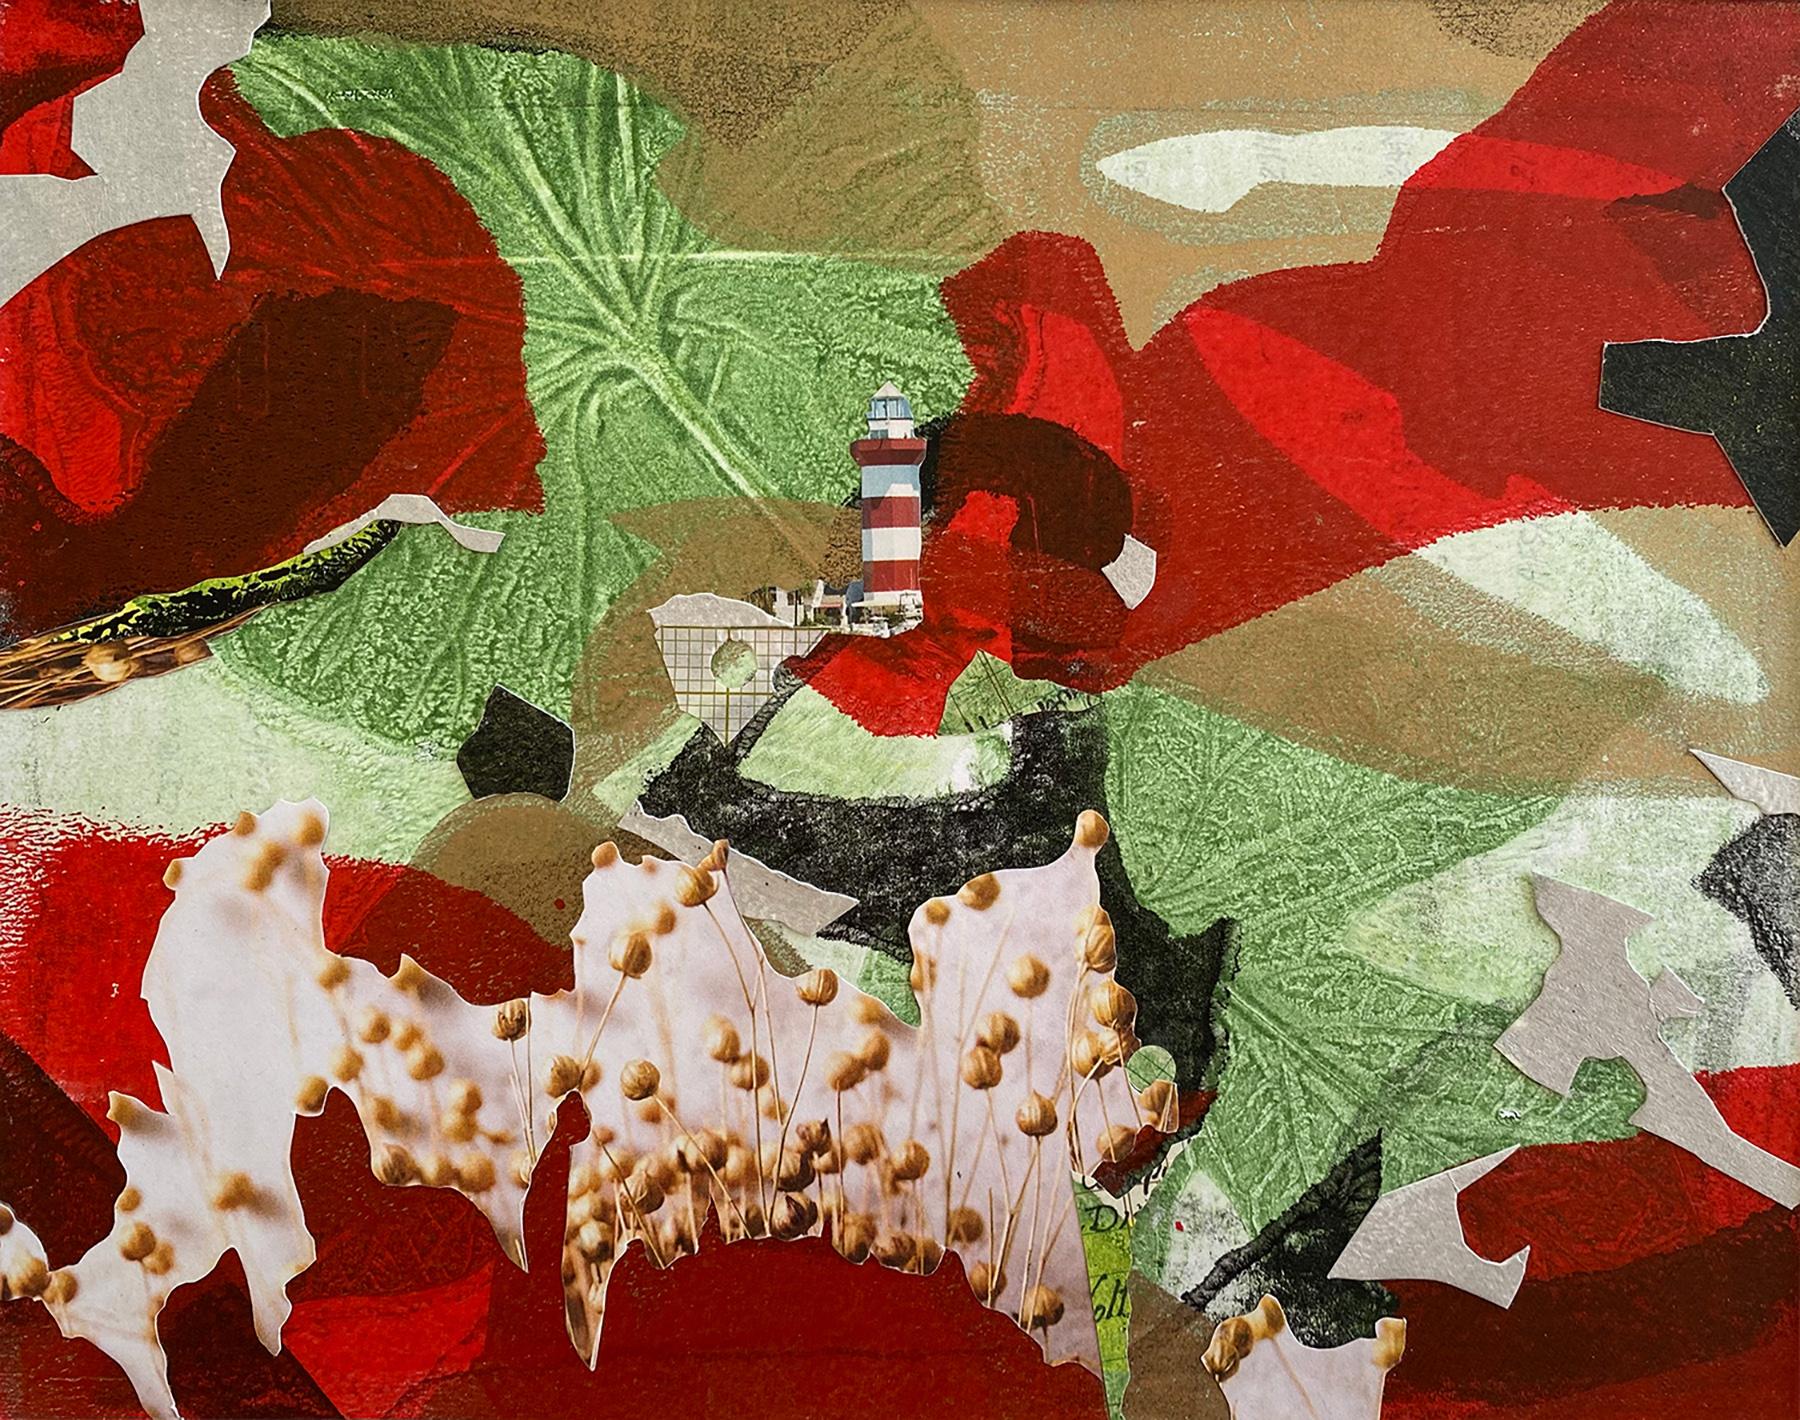 "Looking Around for You", surreal, botanical, abstract, collage, monotype - Mixed Media Art by Monica DeSalvo